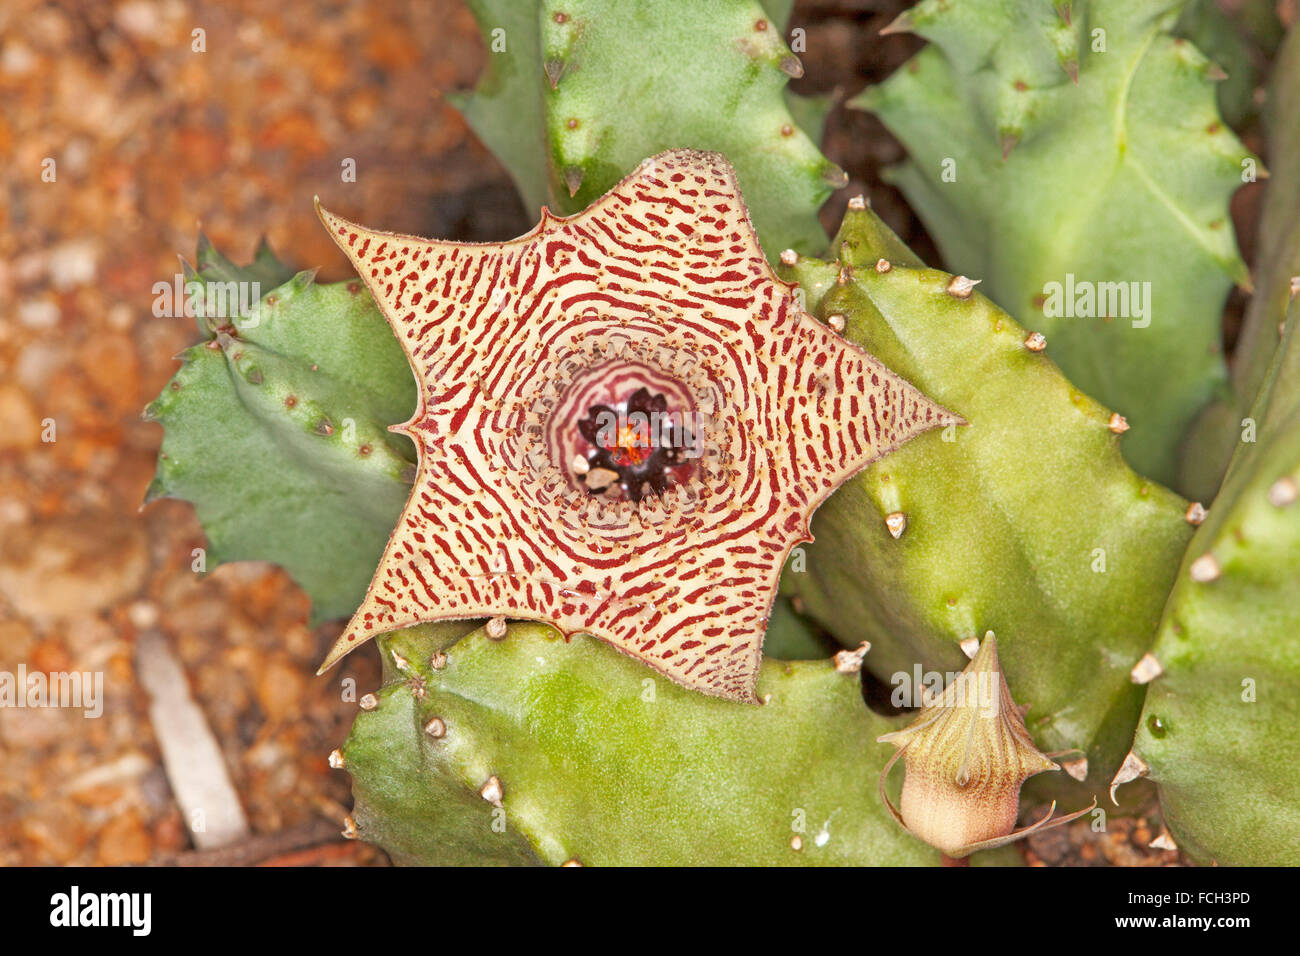 Unusual star shaped flower, bud and green stems of South African succulent plant Huernia loeseneriana Stock Photo